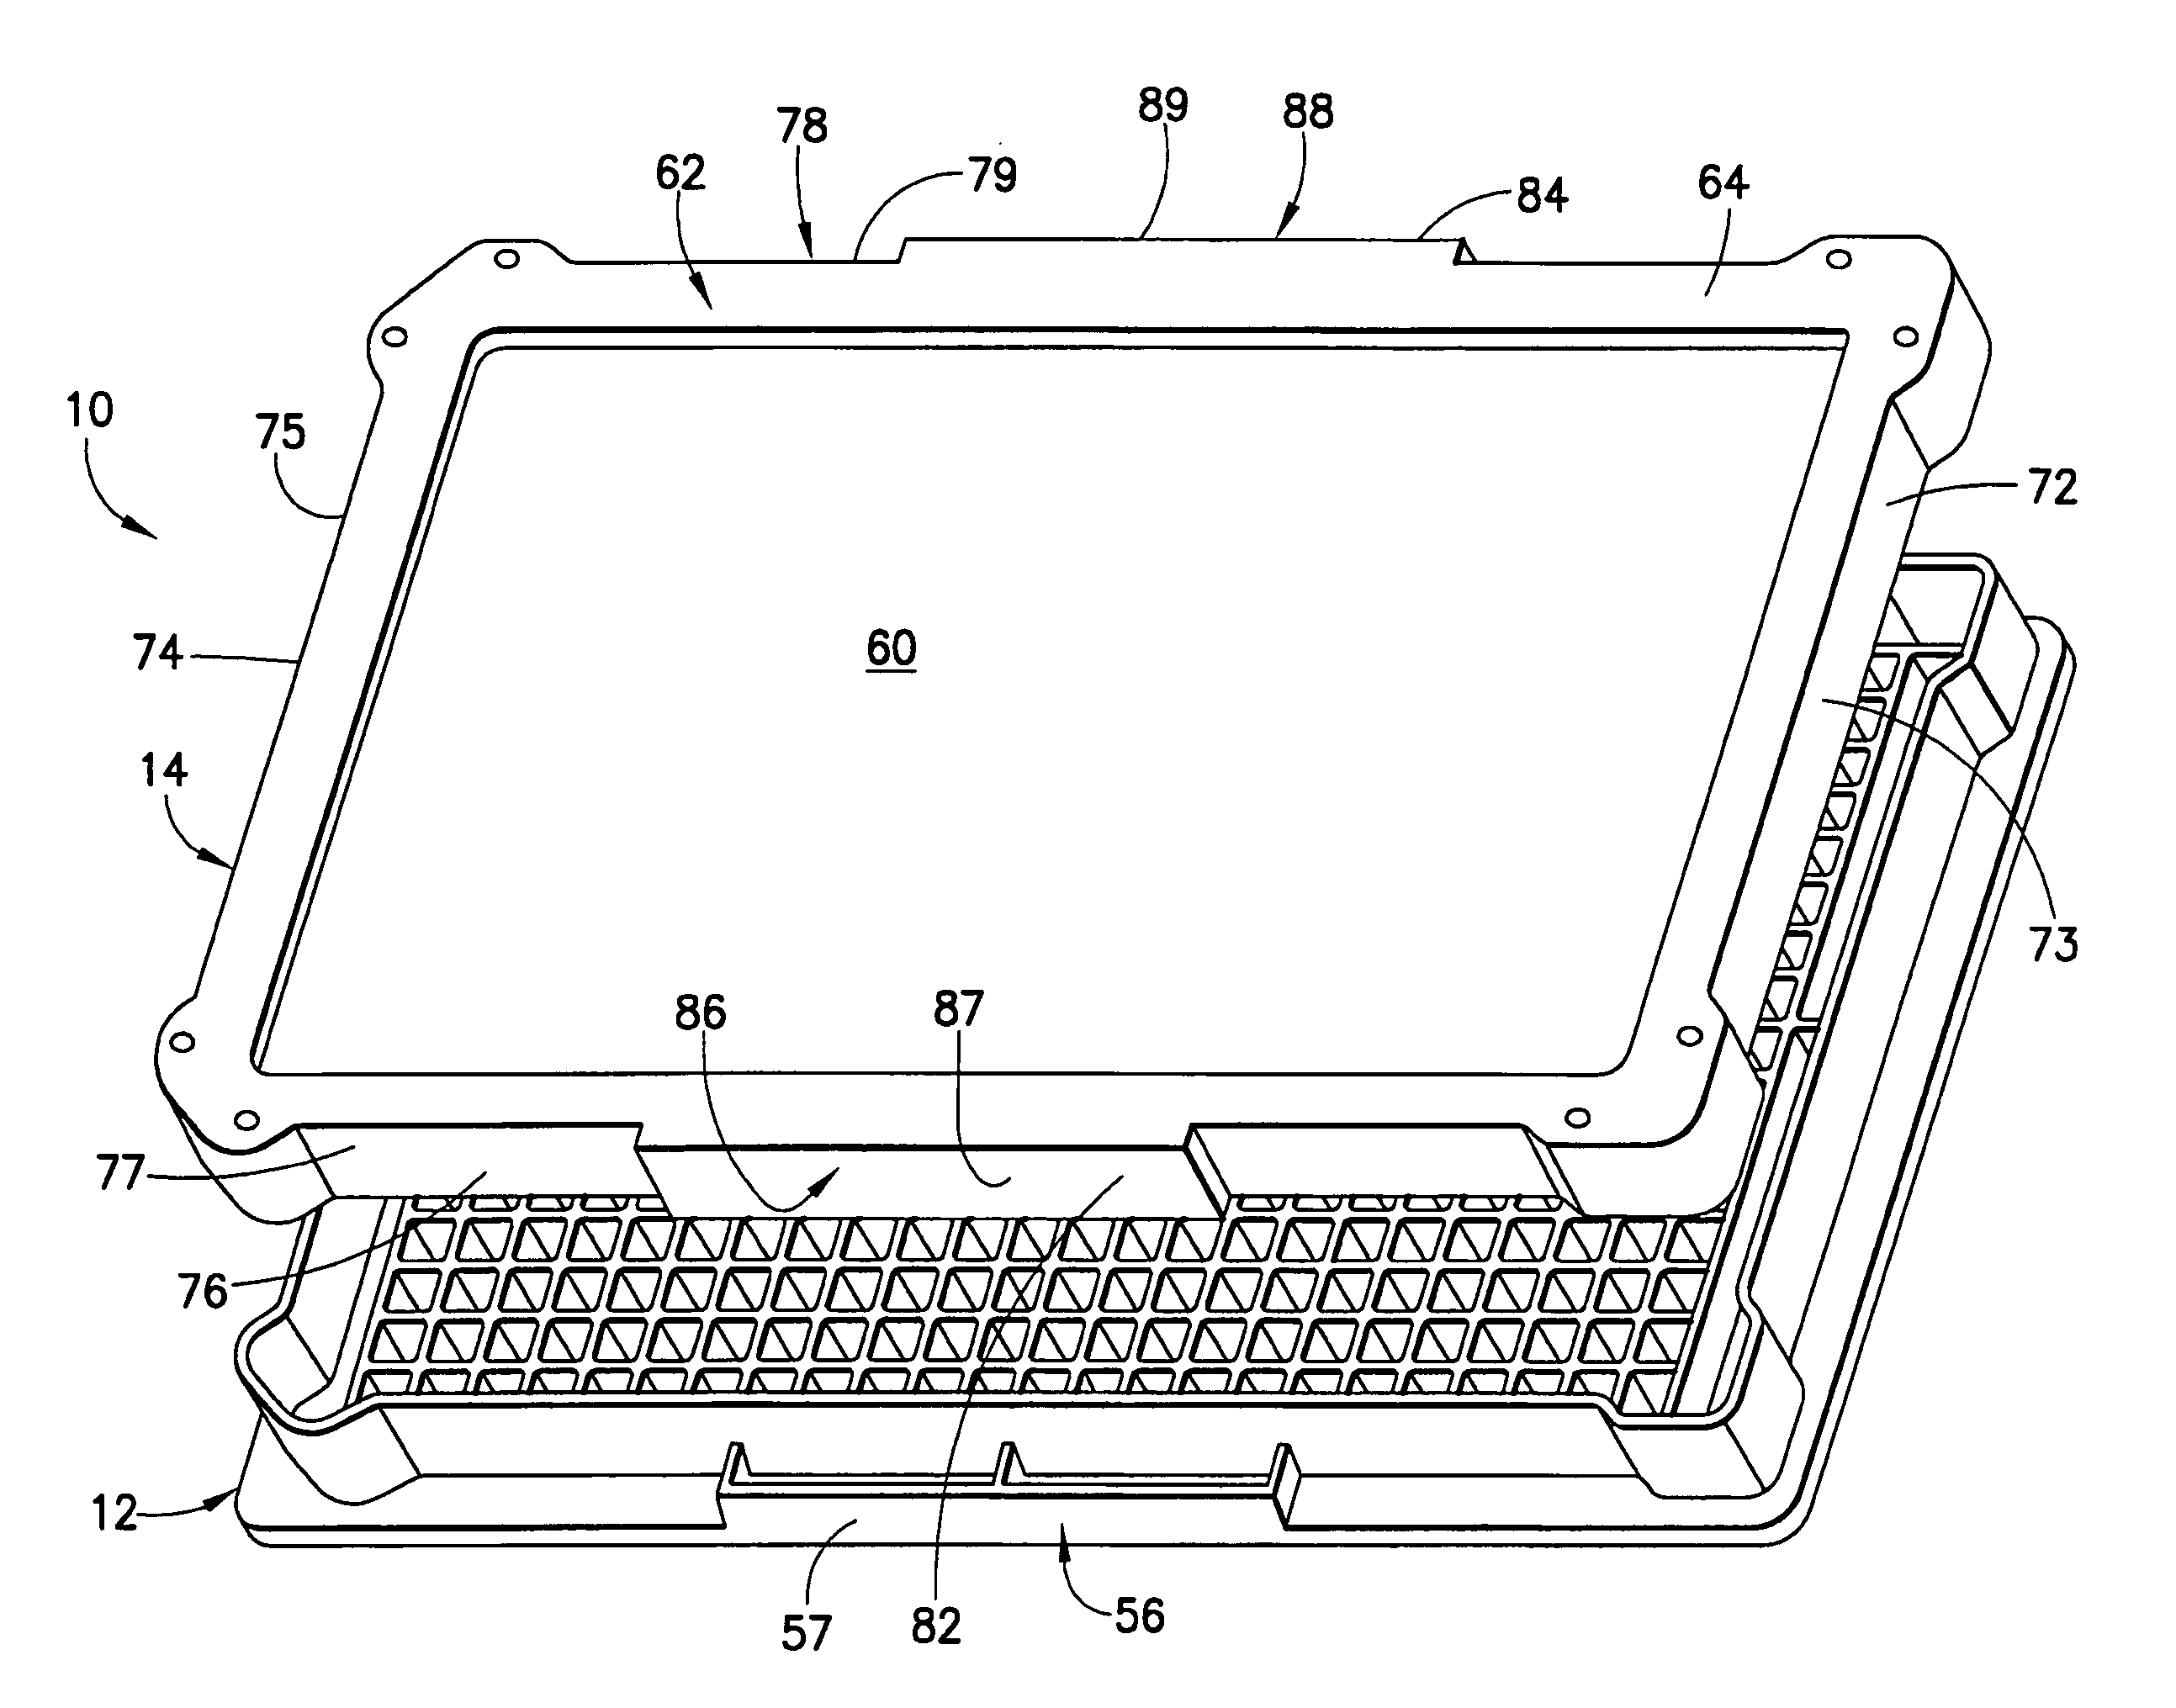 Micro-plate and lid for robotic handling